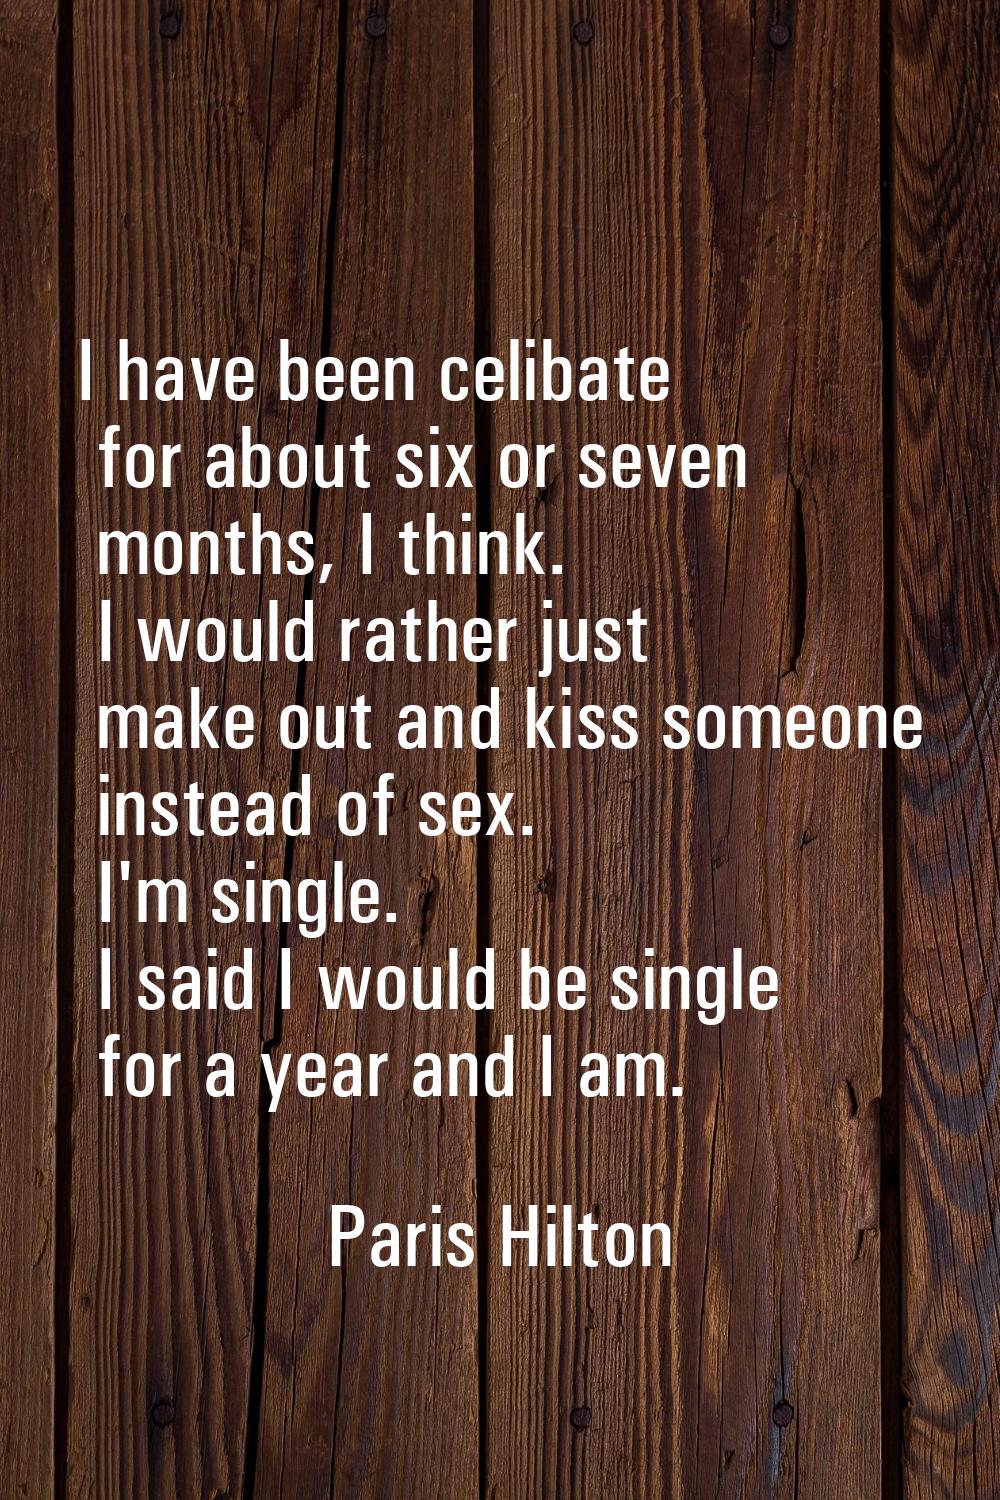 I have been celibate for about six or seven months, I think. I would rather just make out and kiss 